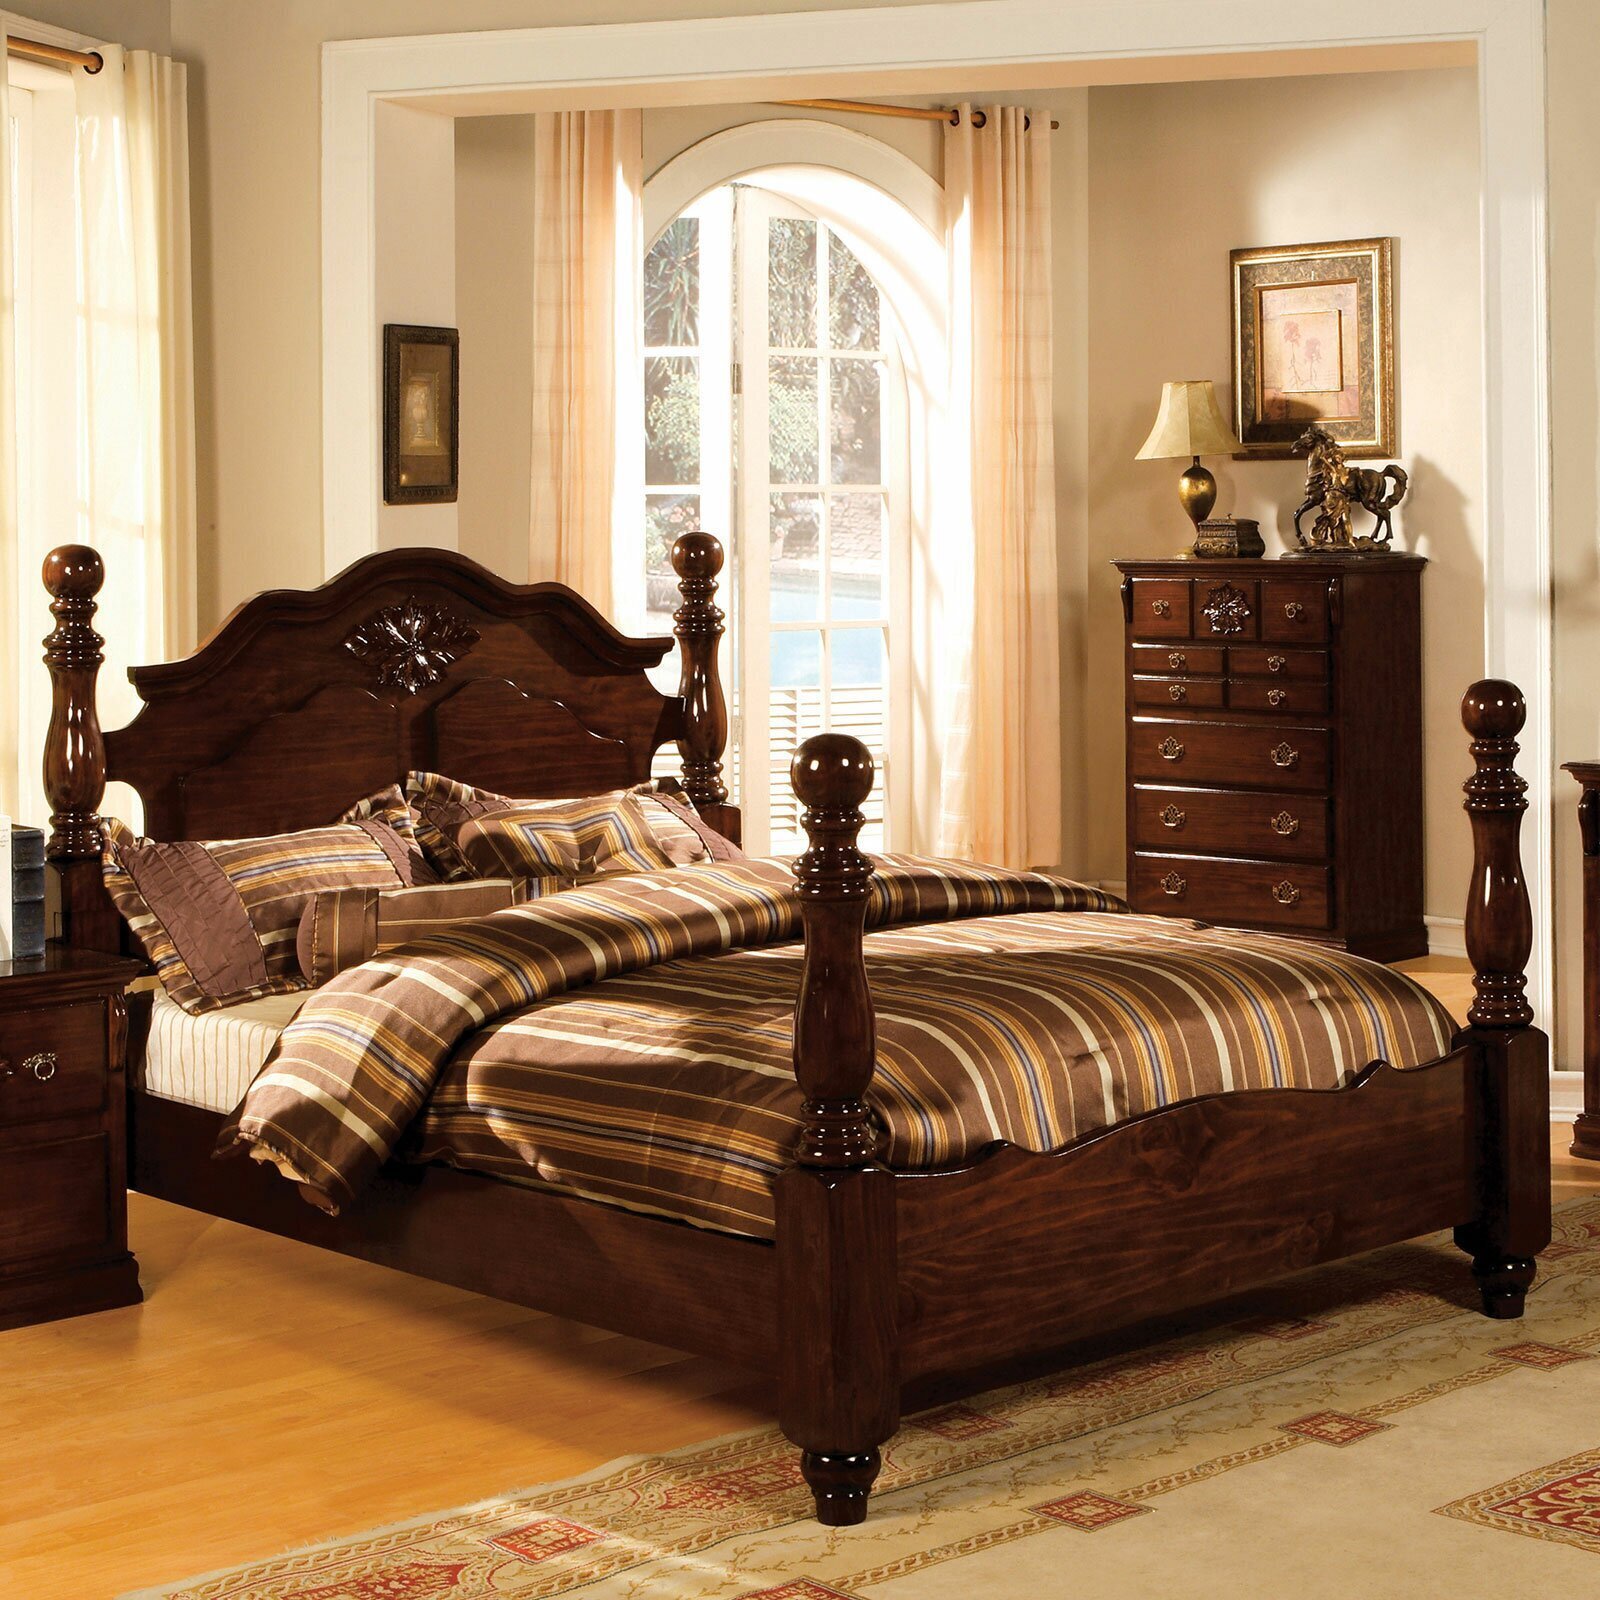 Glossy wooden 4 post bed